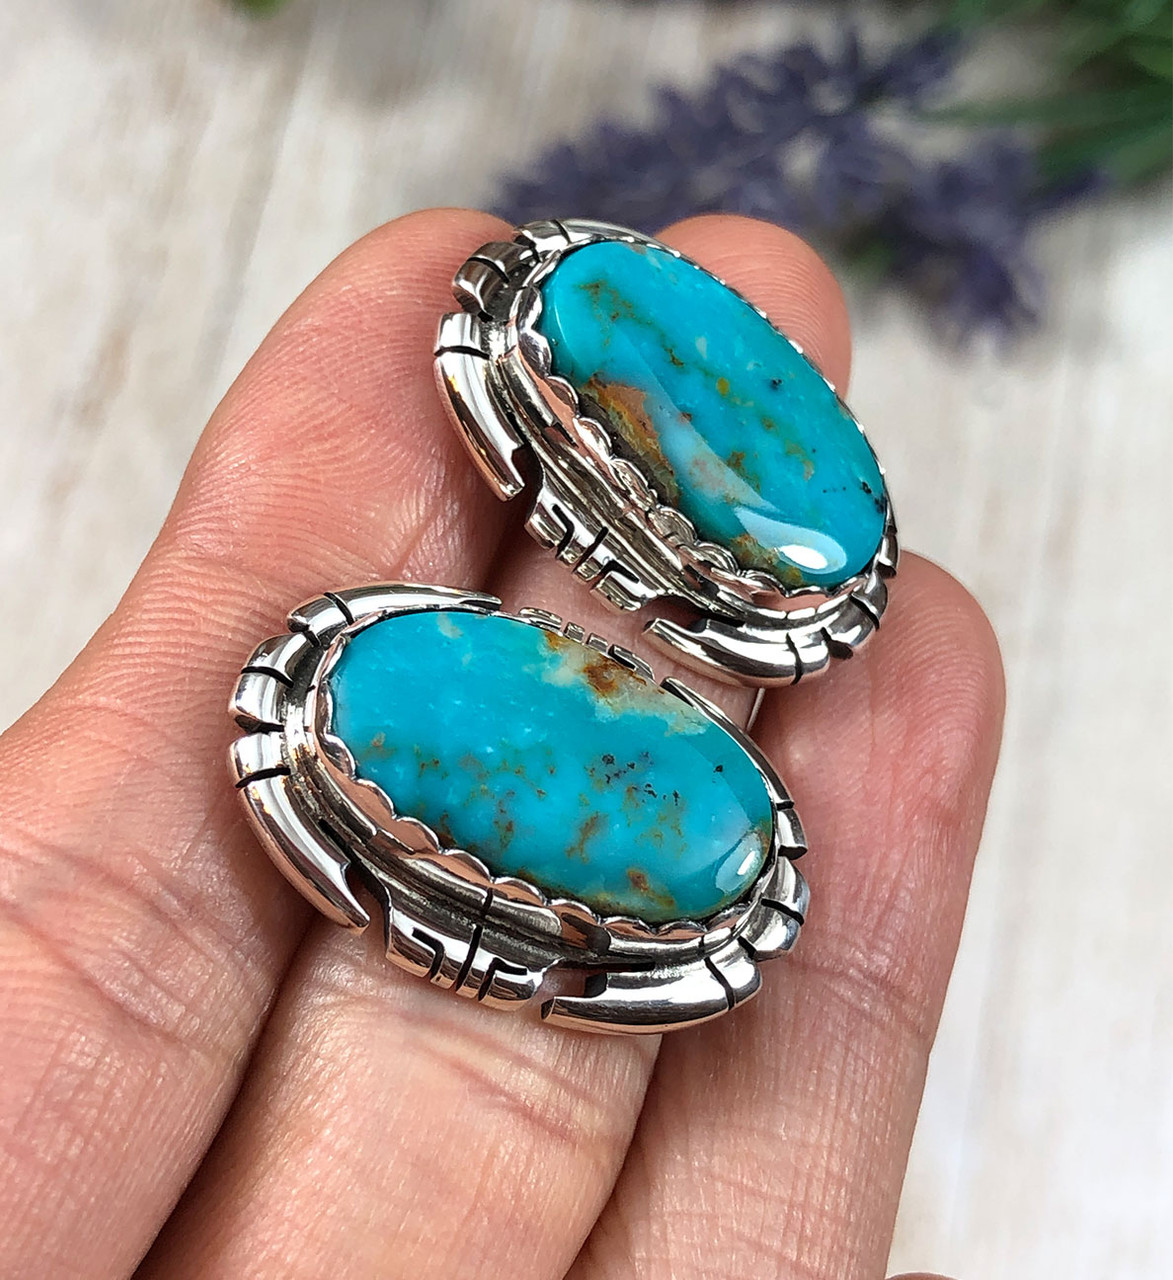 Turquoise Stud Earrings – Made By Mary